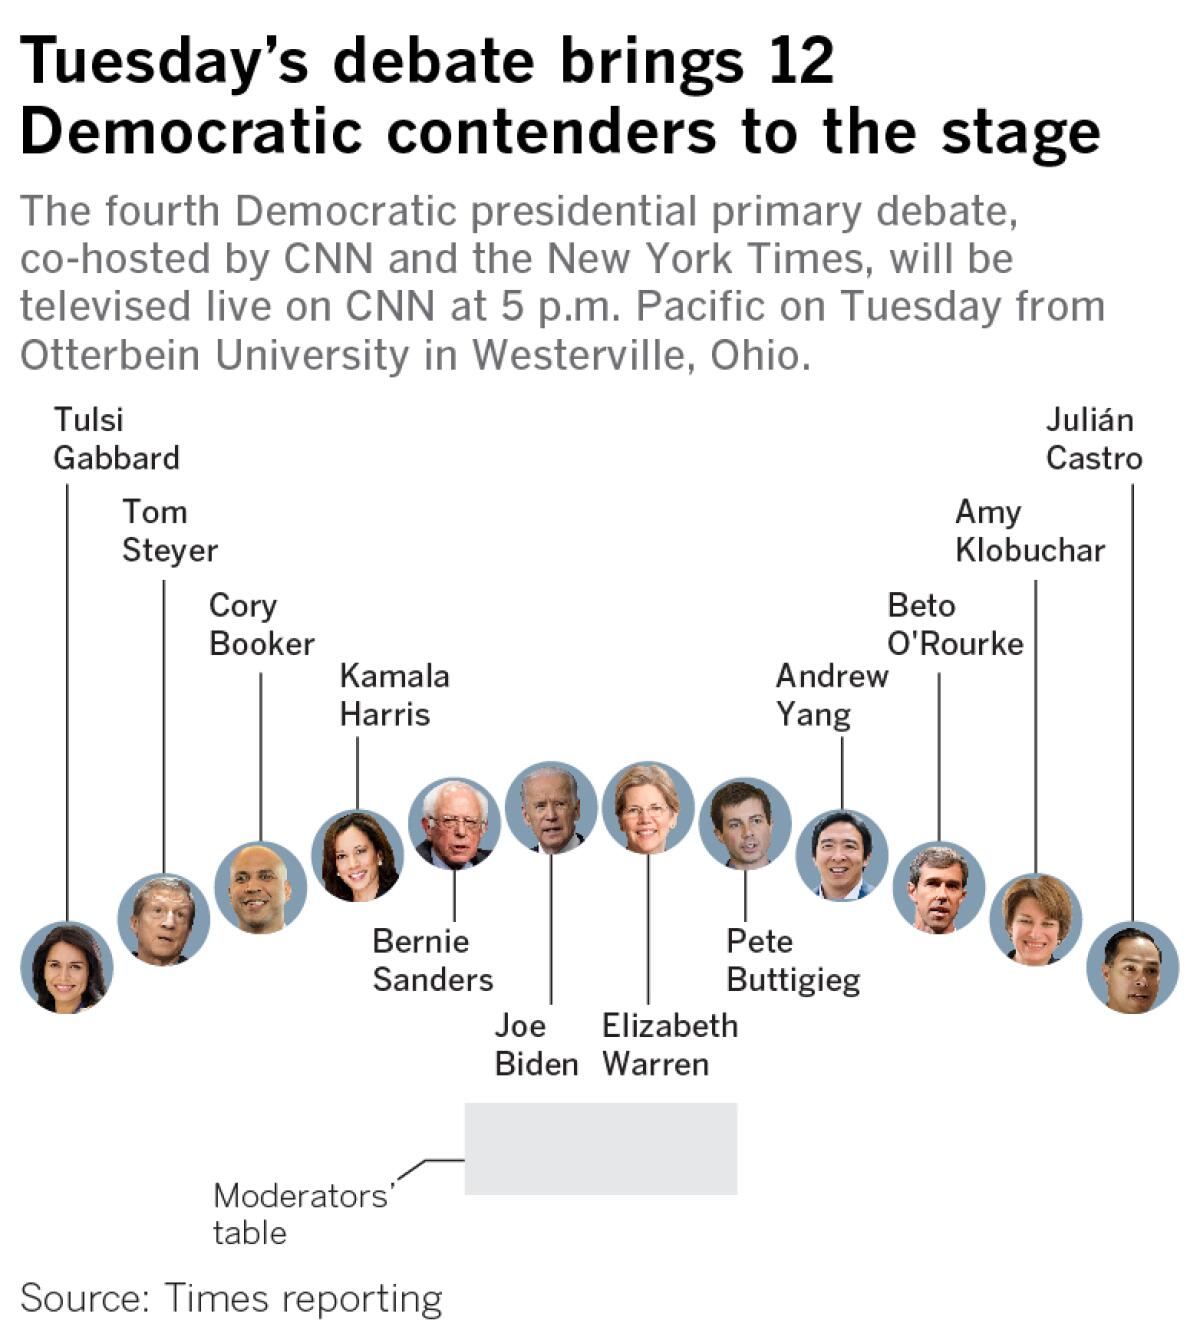 The fourth Democratic presidential primary debate, co-hosted by CNN and the New York Times, will be televised live on CNN at 5 p.m. Pacific on Tuesday from Otterbein University in Westerville, Ohio.